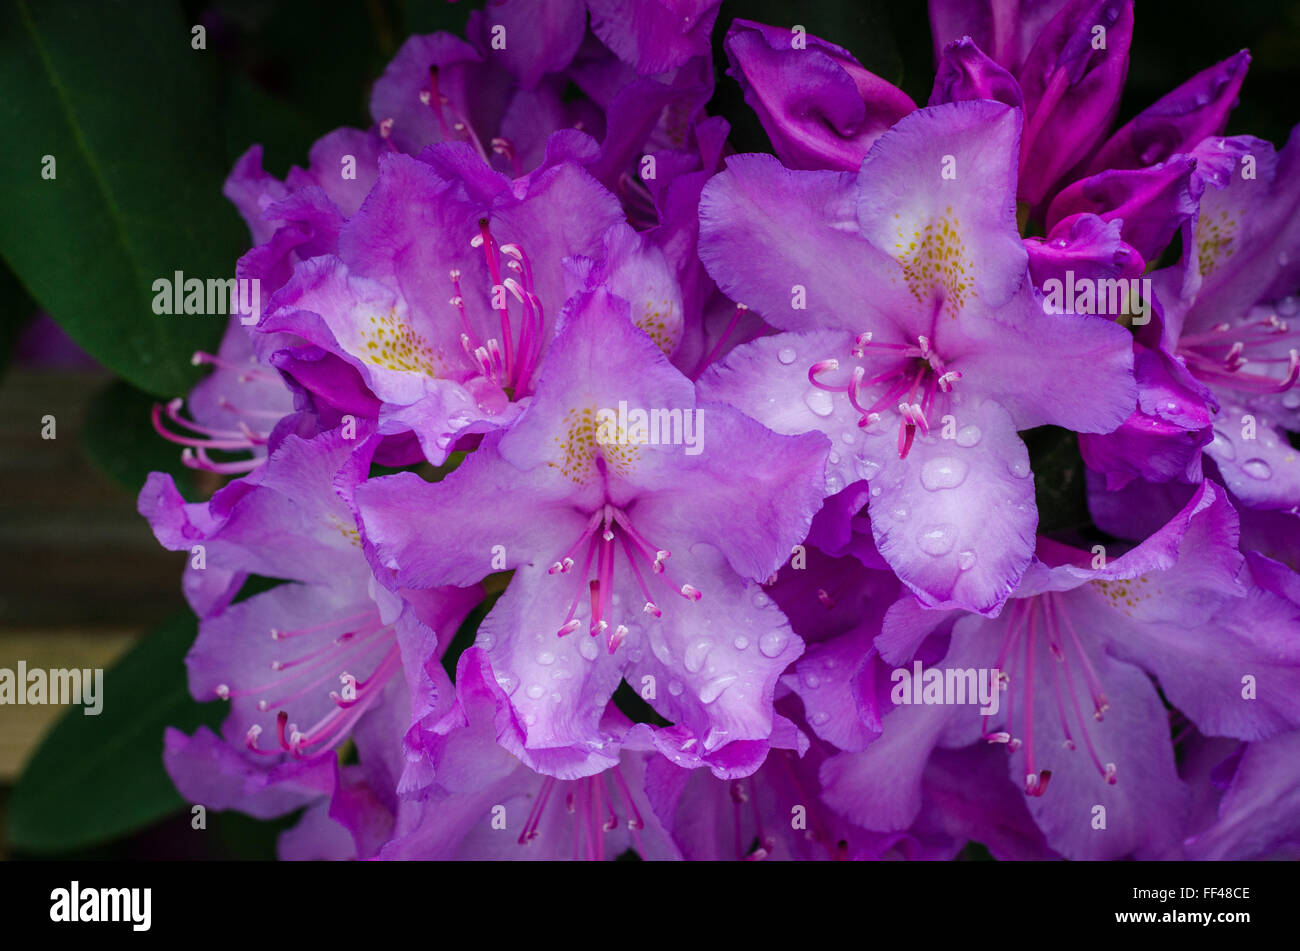 A rhododendron bush in full bloom with raindrops on the blossoms. Stock Photo